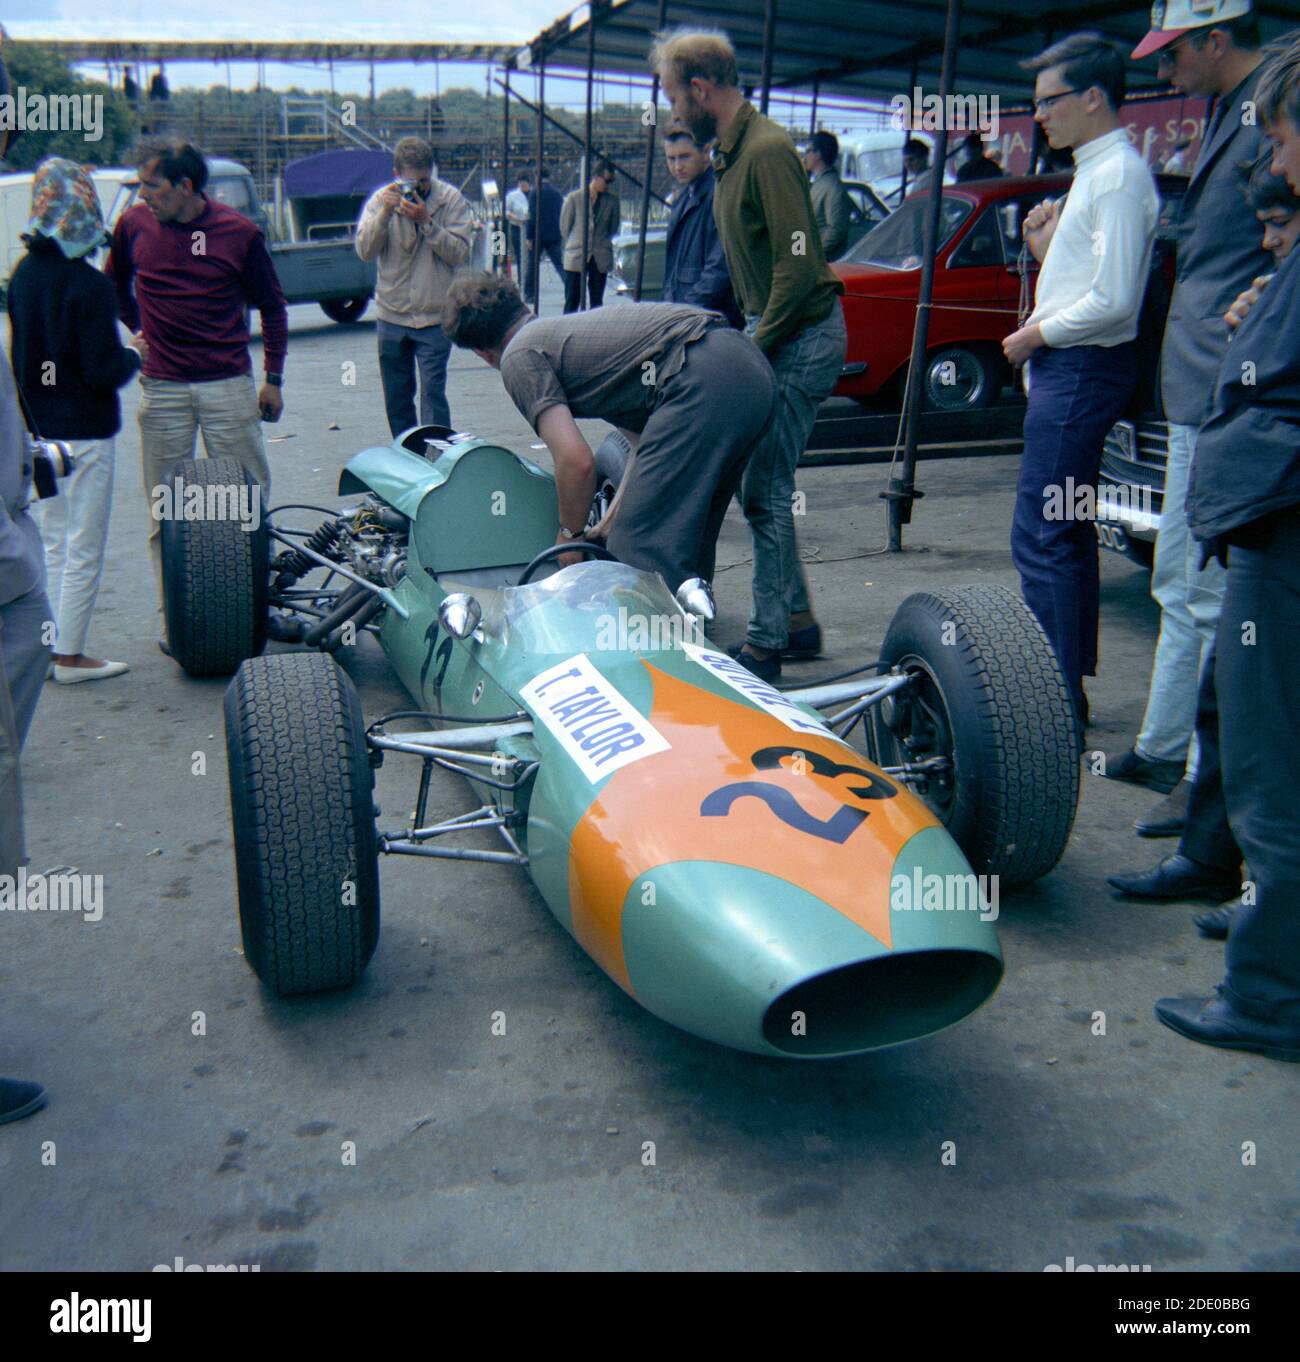 Shannon-Emery Formula 1 car in the paddock at Brands Hatch Practice for the 1966 British Grand Prix, 15th July. Driver Trevor Taylor retired on lap 1 Stock Photo